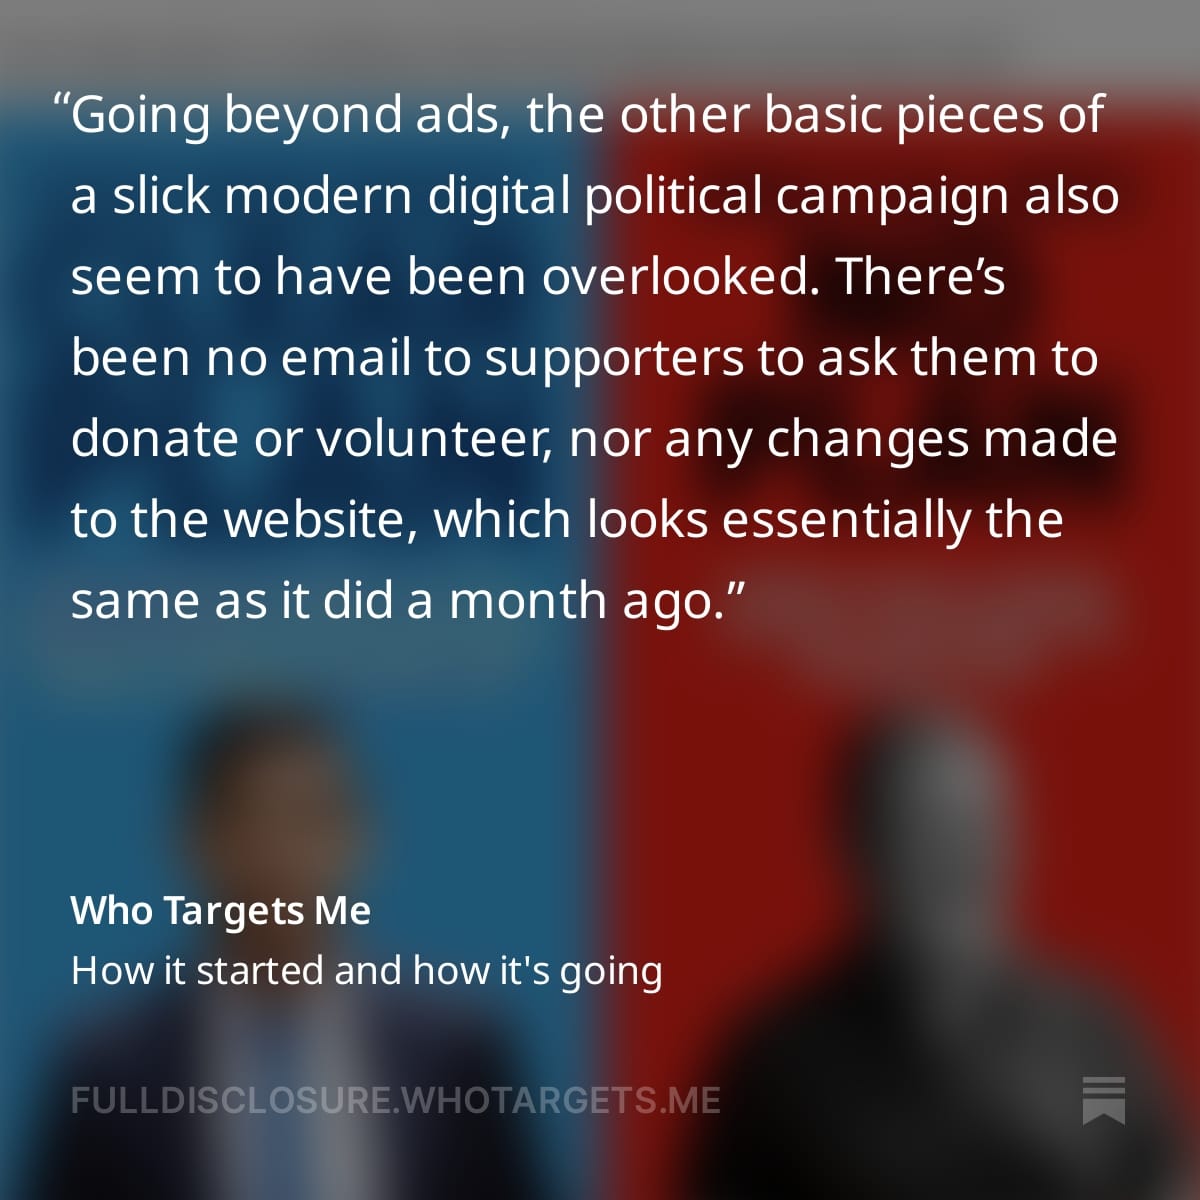 A graphic with text from the Full Disclosure newsletter reading: Going beyond ads, the other basic pieces of a slick modern digital political campaign also seem to have been overlooked. There’s been no email to supporters to ask them to donate or volunteer, nor any changes made to the website, which looks essentially the same as it did a month ago.